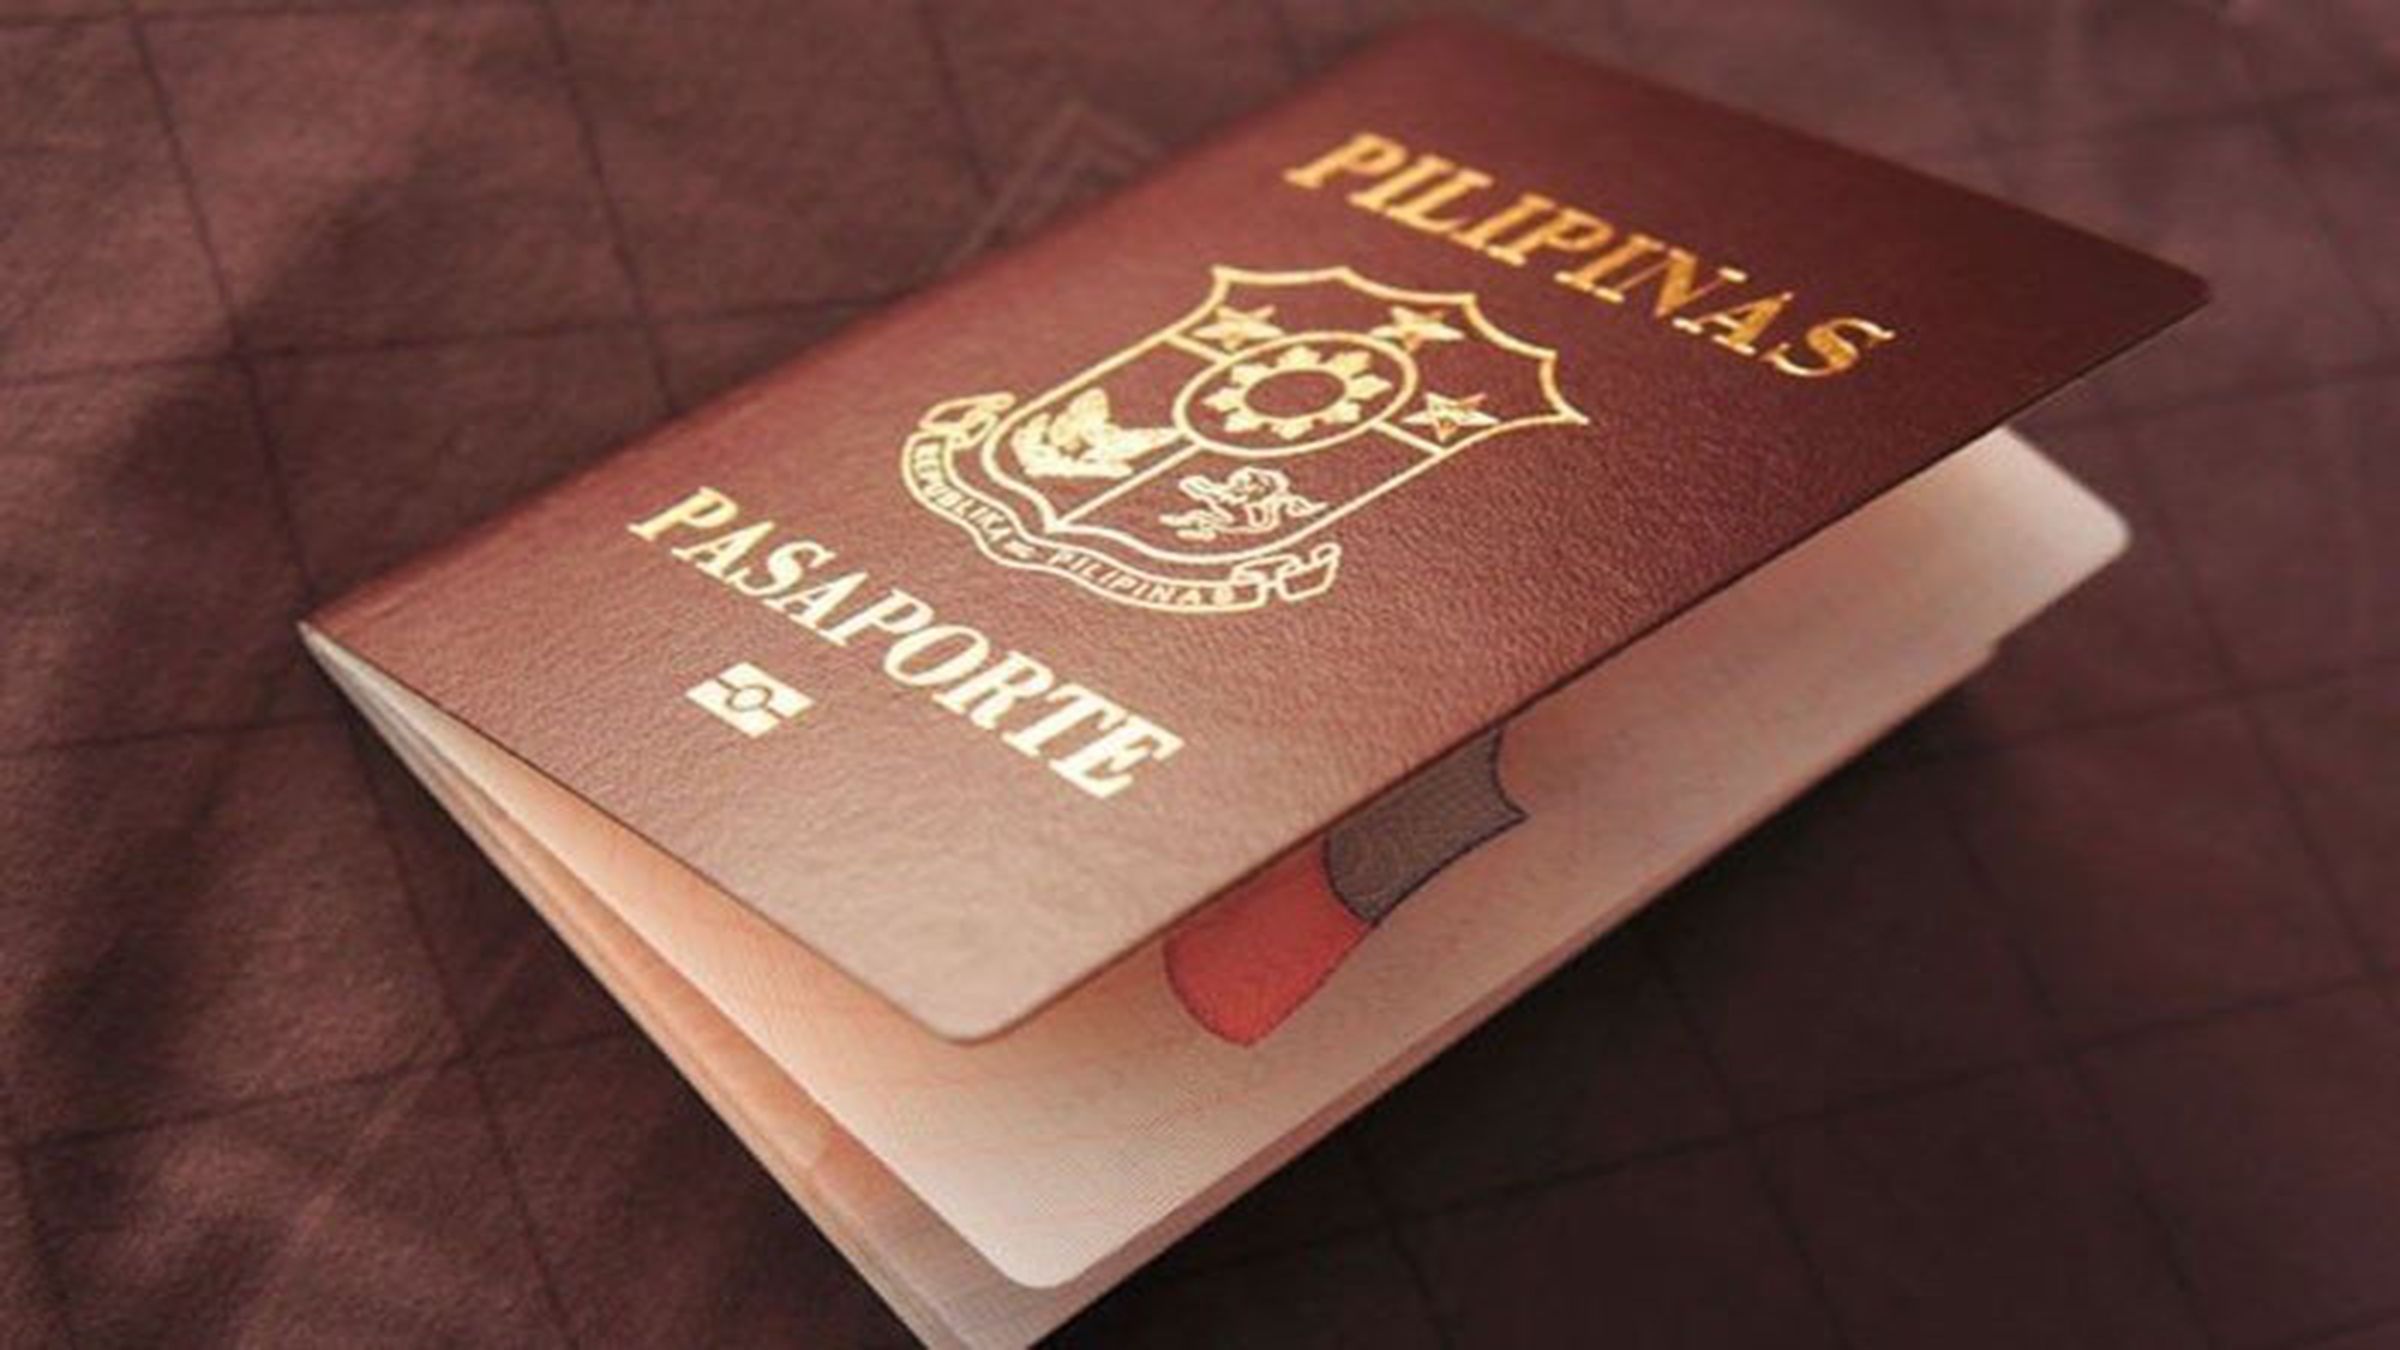 No lifetime passports for seniors and the elderly